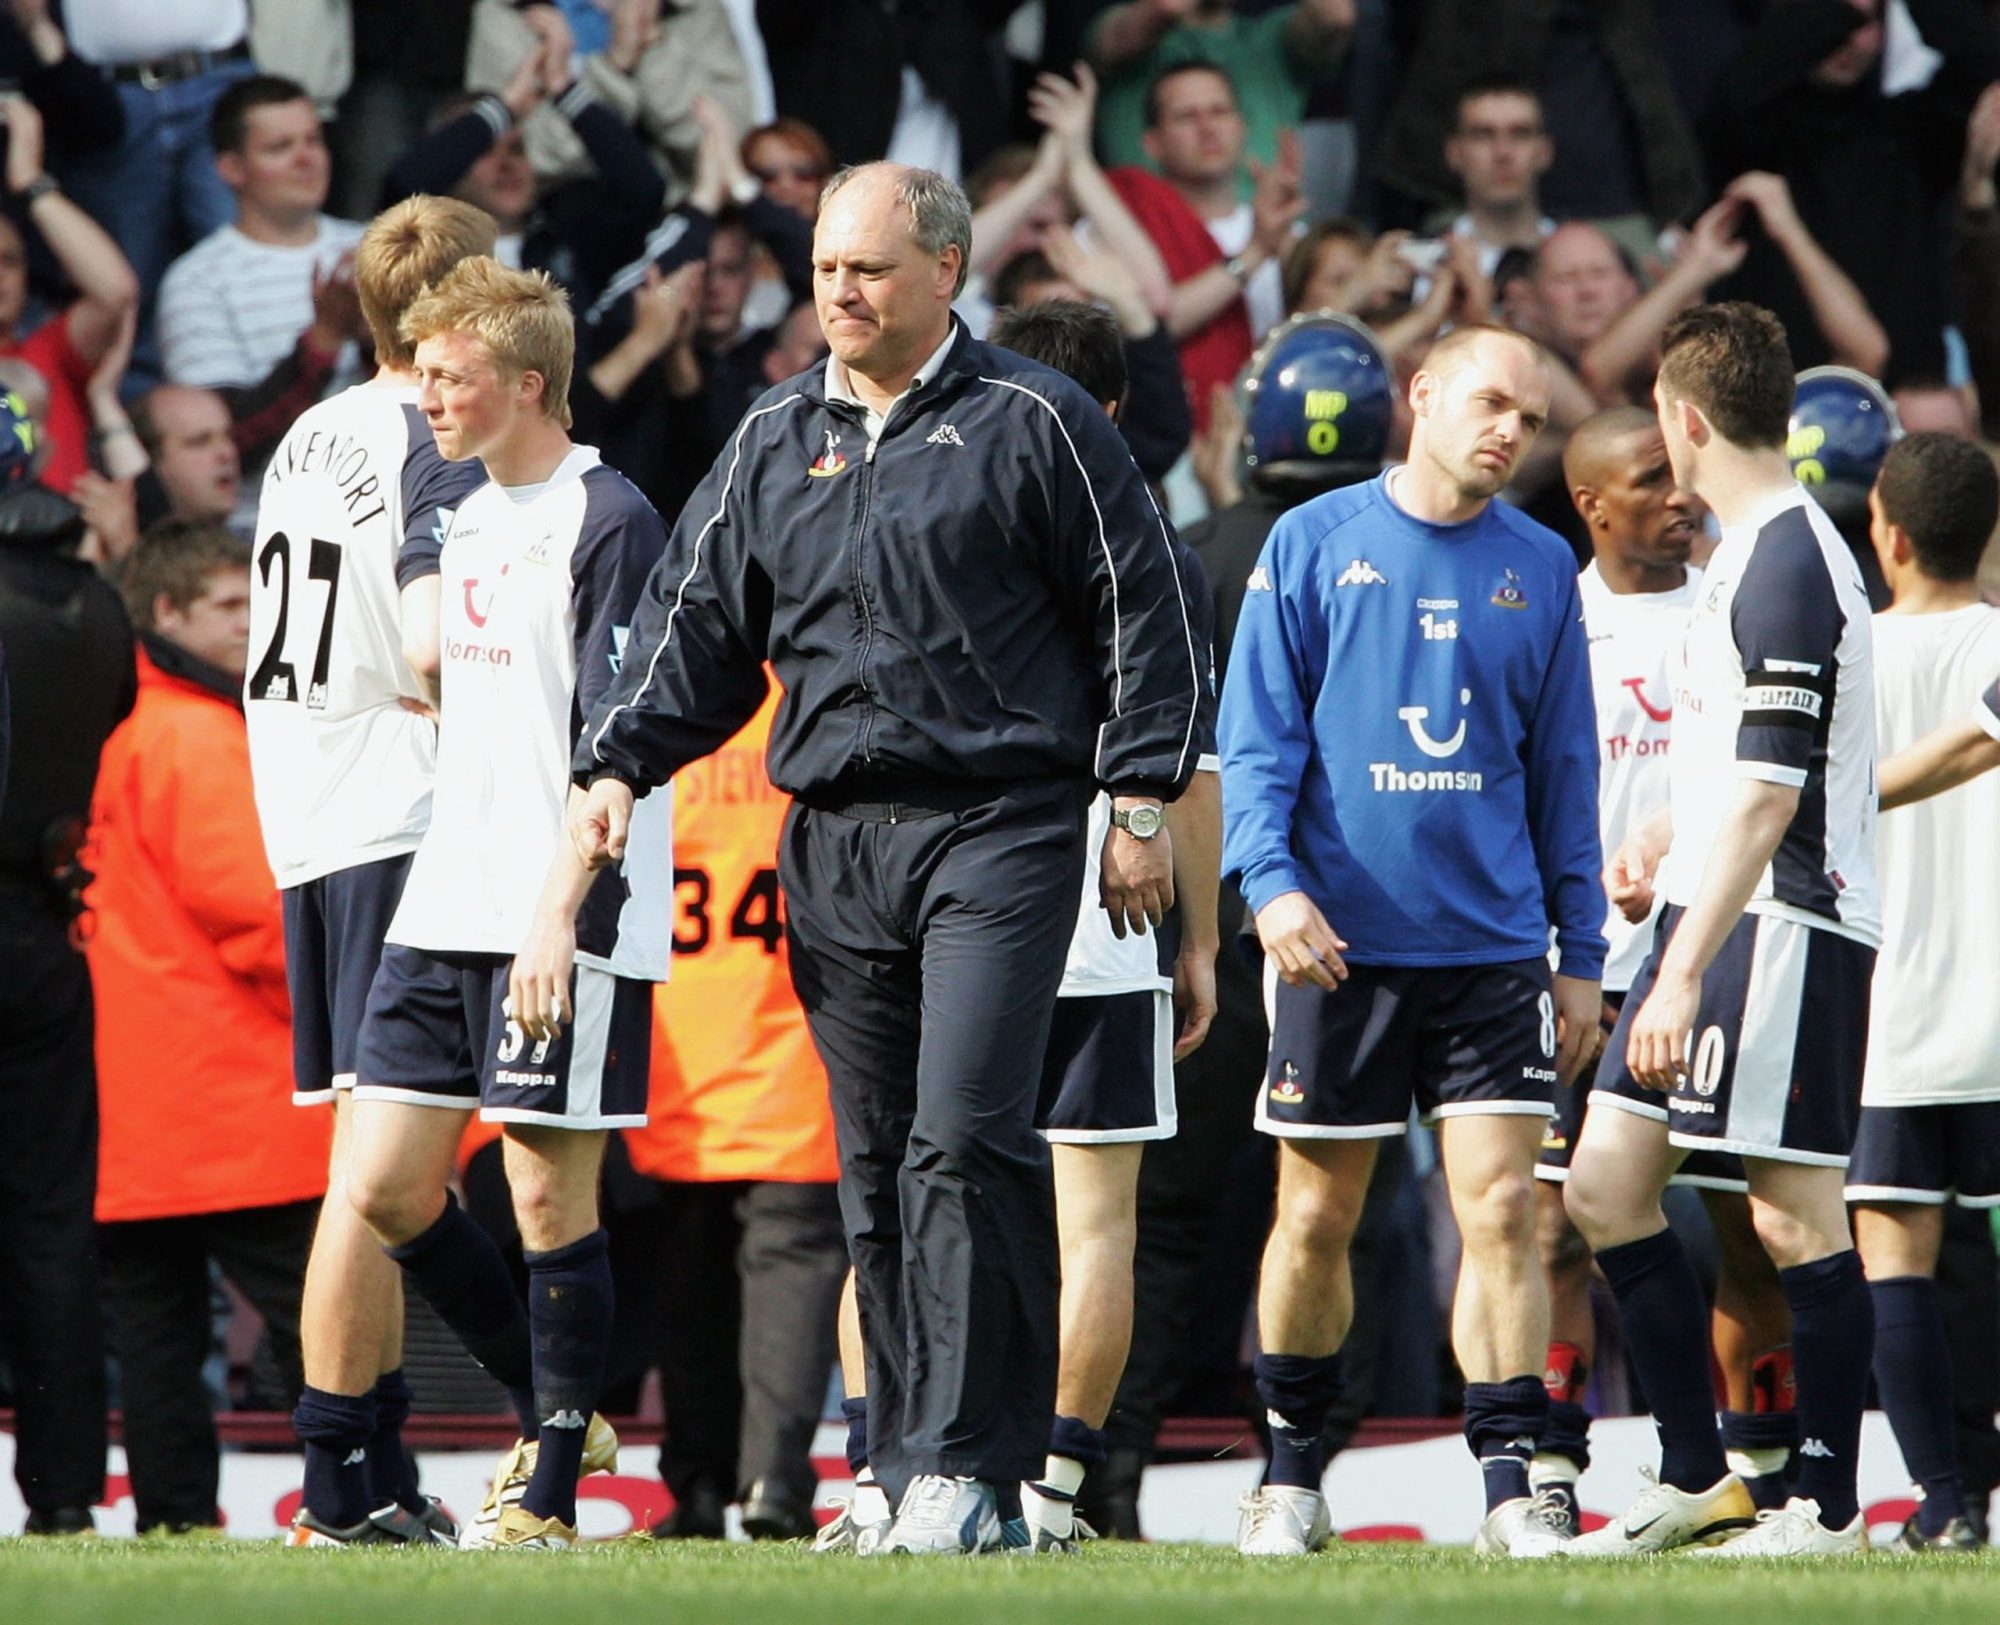 LONDON - MAY 07: Martin Jol, manager of Tottenham Hotspur, (C) looked dejected as his team miss out on a Champions League place following the Barclays Premiership match between West Ham United and Tottenham Hotspur at Upton Park on May 7, 2006 in London, England. (Photo by Phil Cole/Getty Images)